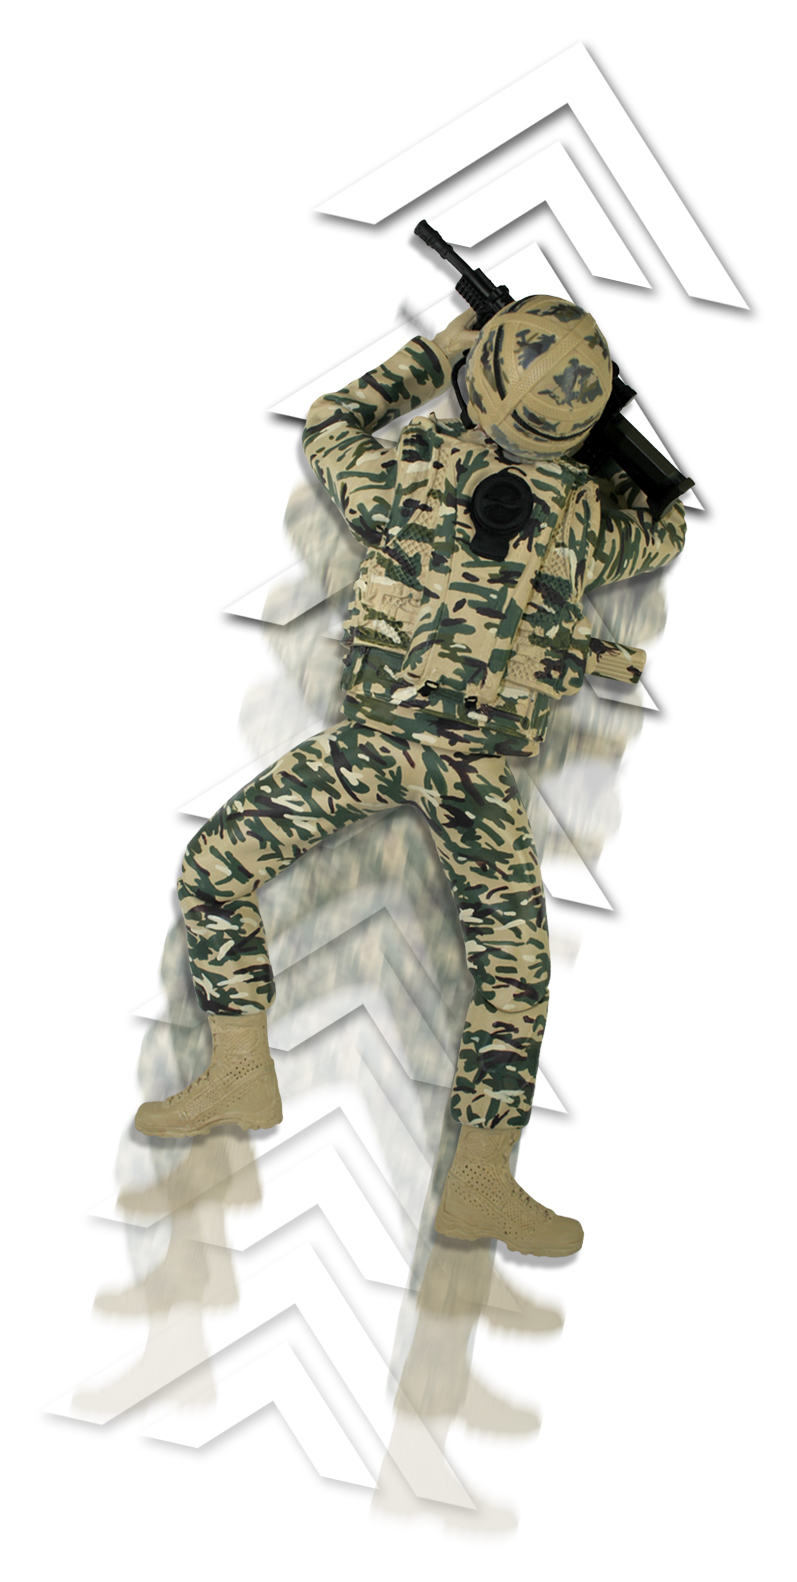 H.M. Armed Forces Armed Forces Crawling Infantryman Figure